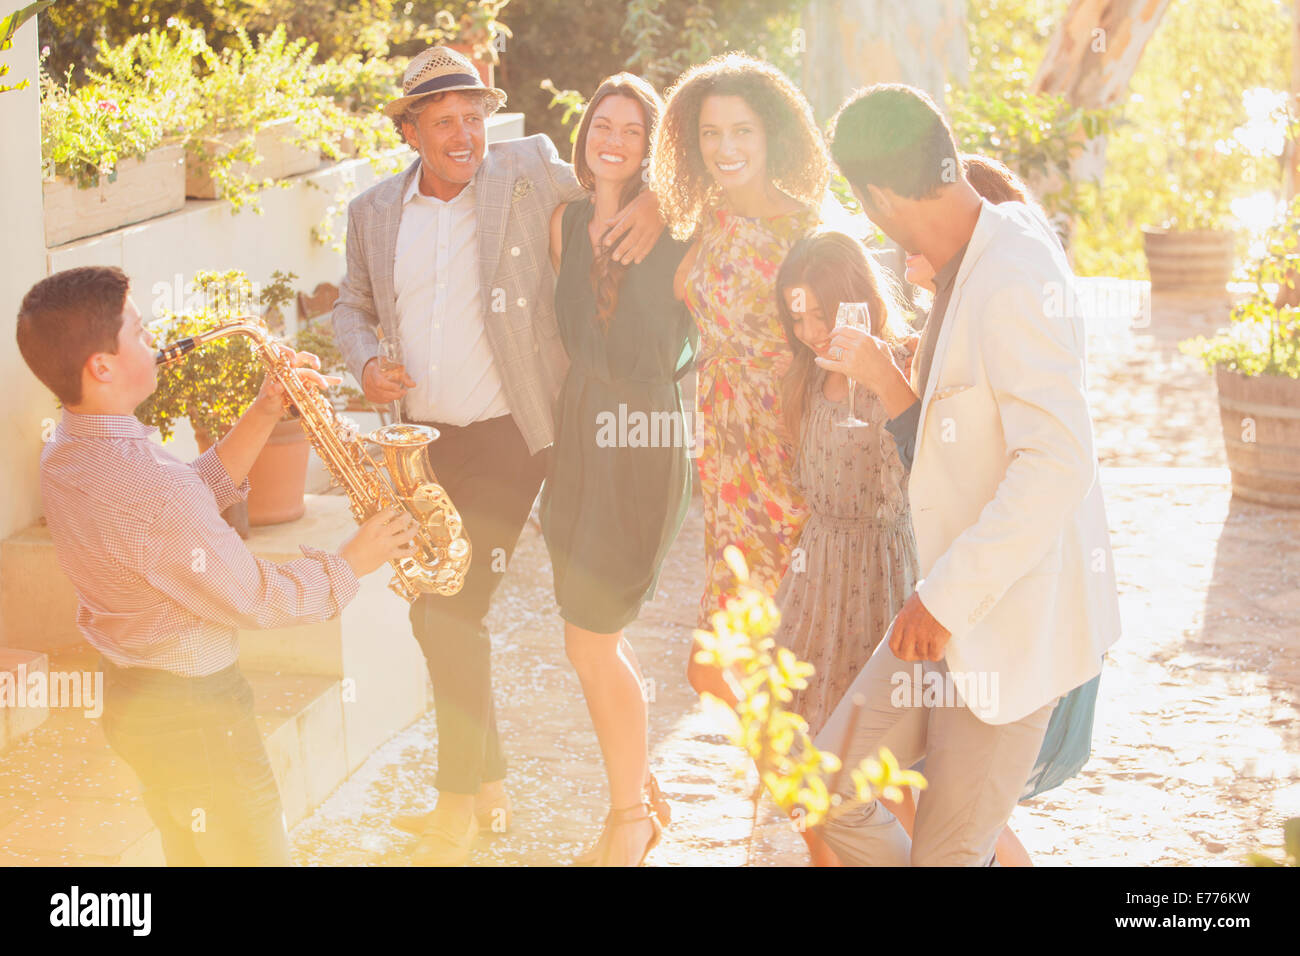 Family dancing together outdoors Stock Photo